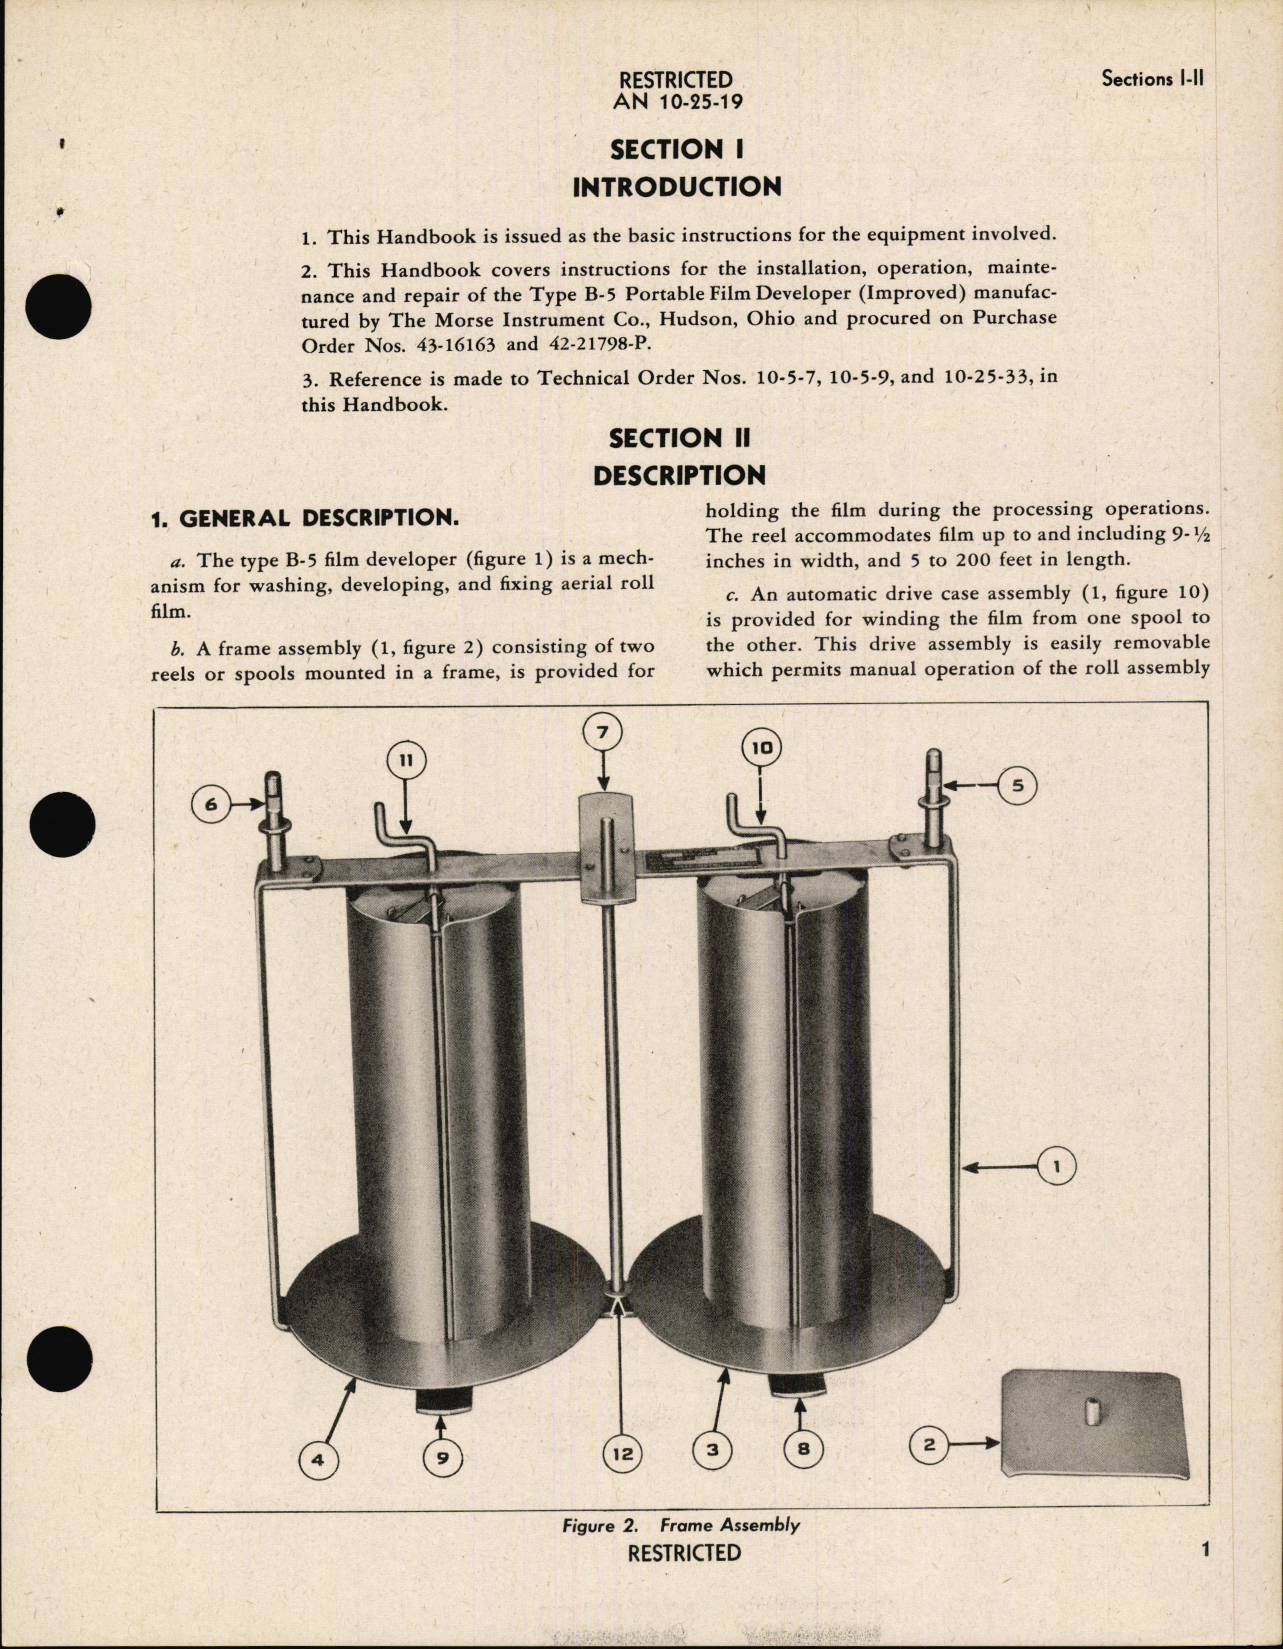 Sample page 5 from AirCorps Library document: Handbook of Instructions with Parts Catalog for Type B-5 Portable Film Developer (Improved)